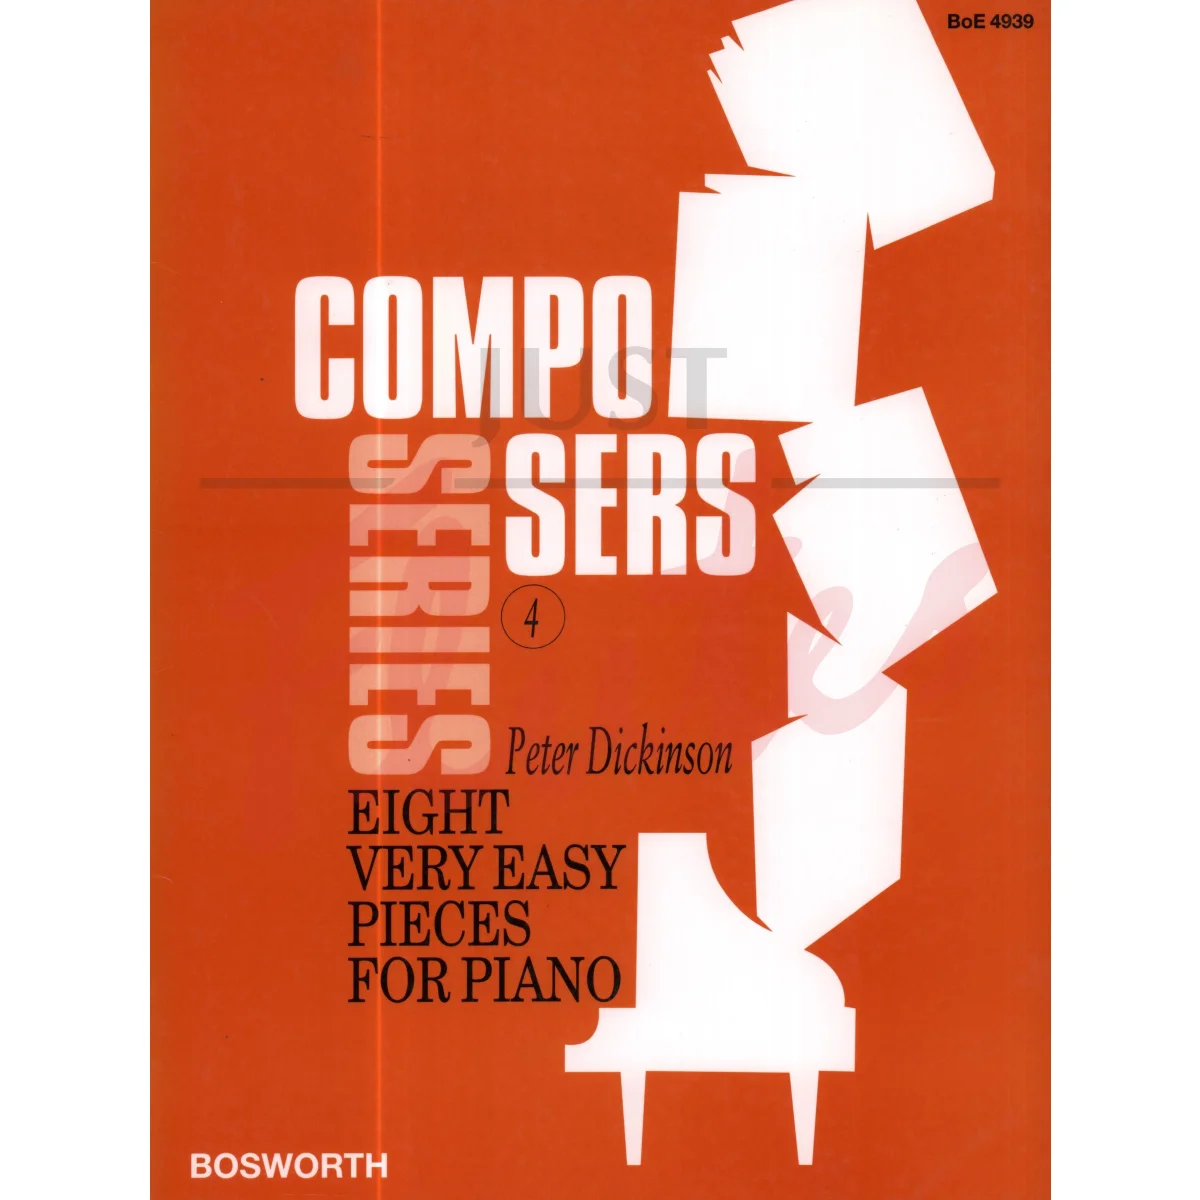 Composers Series Vol 4 for Piano